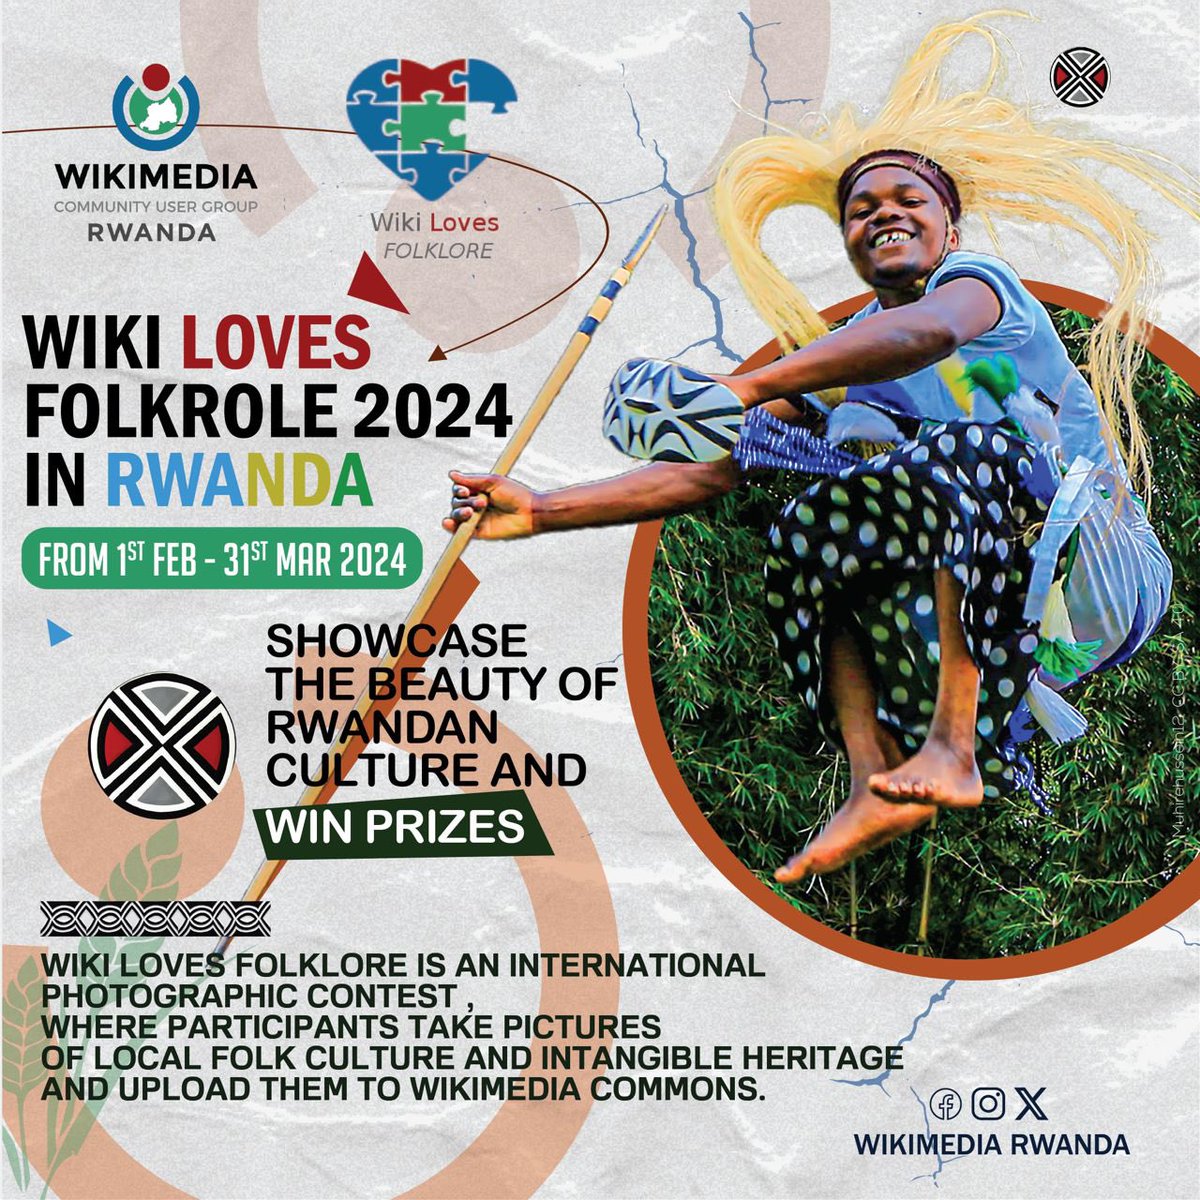 Friendly reminder:#WikiLovesFolklore is currently happening in #Rwanda.Calling all photographers to showcase the vibrant local folk #culture & intangible heritage of Rwanda through their lens.Don't miss out on this opportunity to celebrate and preserve our rich cultural heritage.